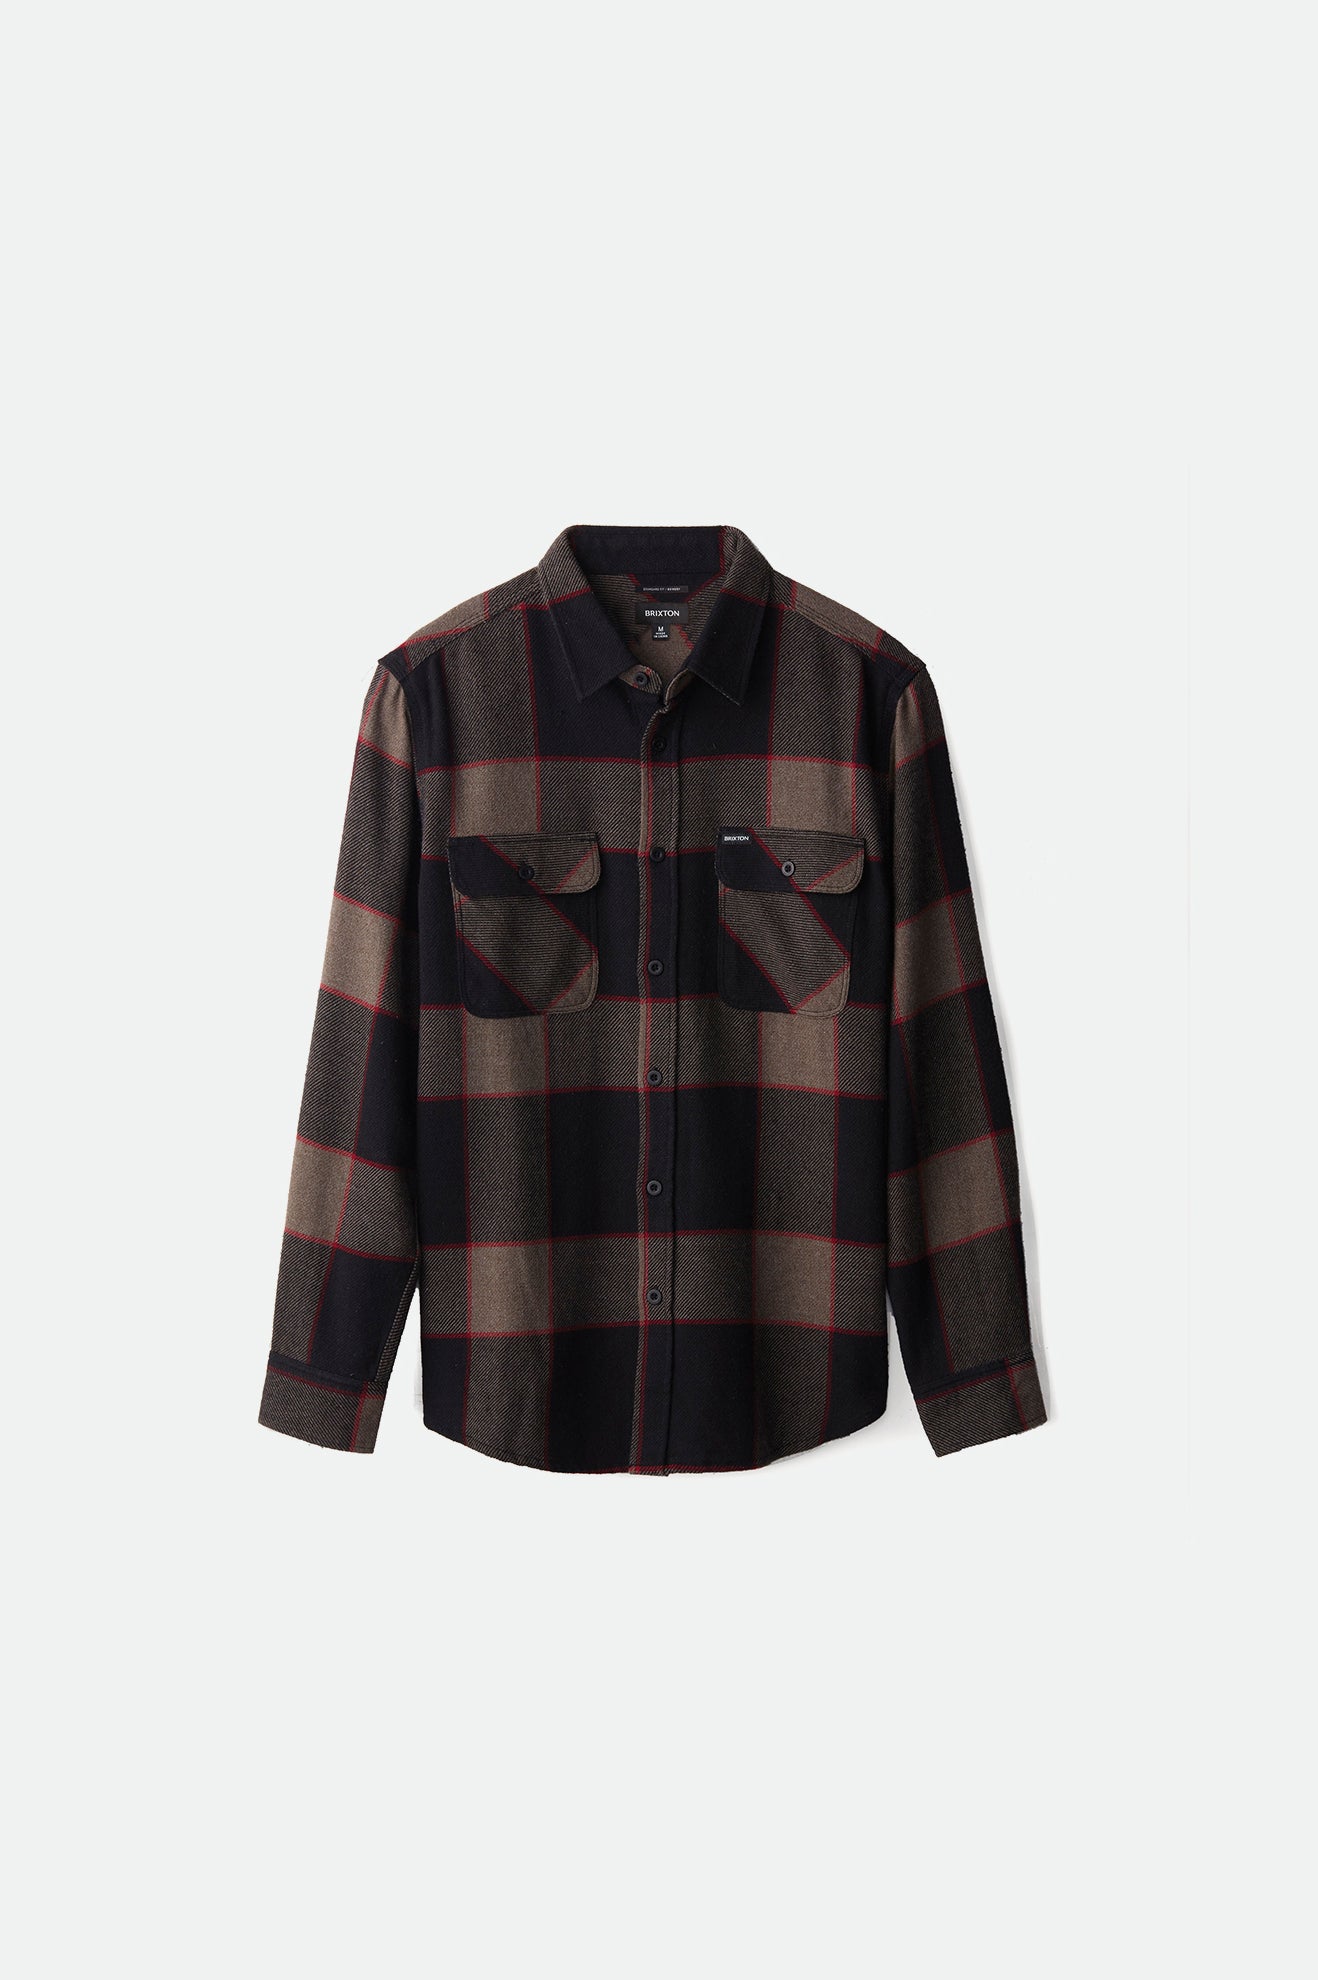 Brixton Men's Bowery L/S Flannel - Heather Grey/Charcoal | Profile